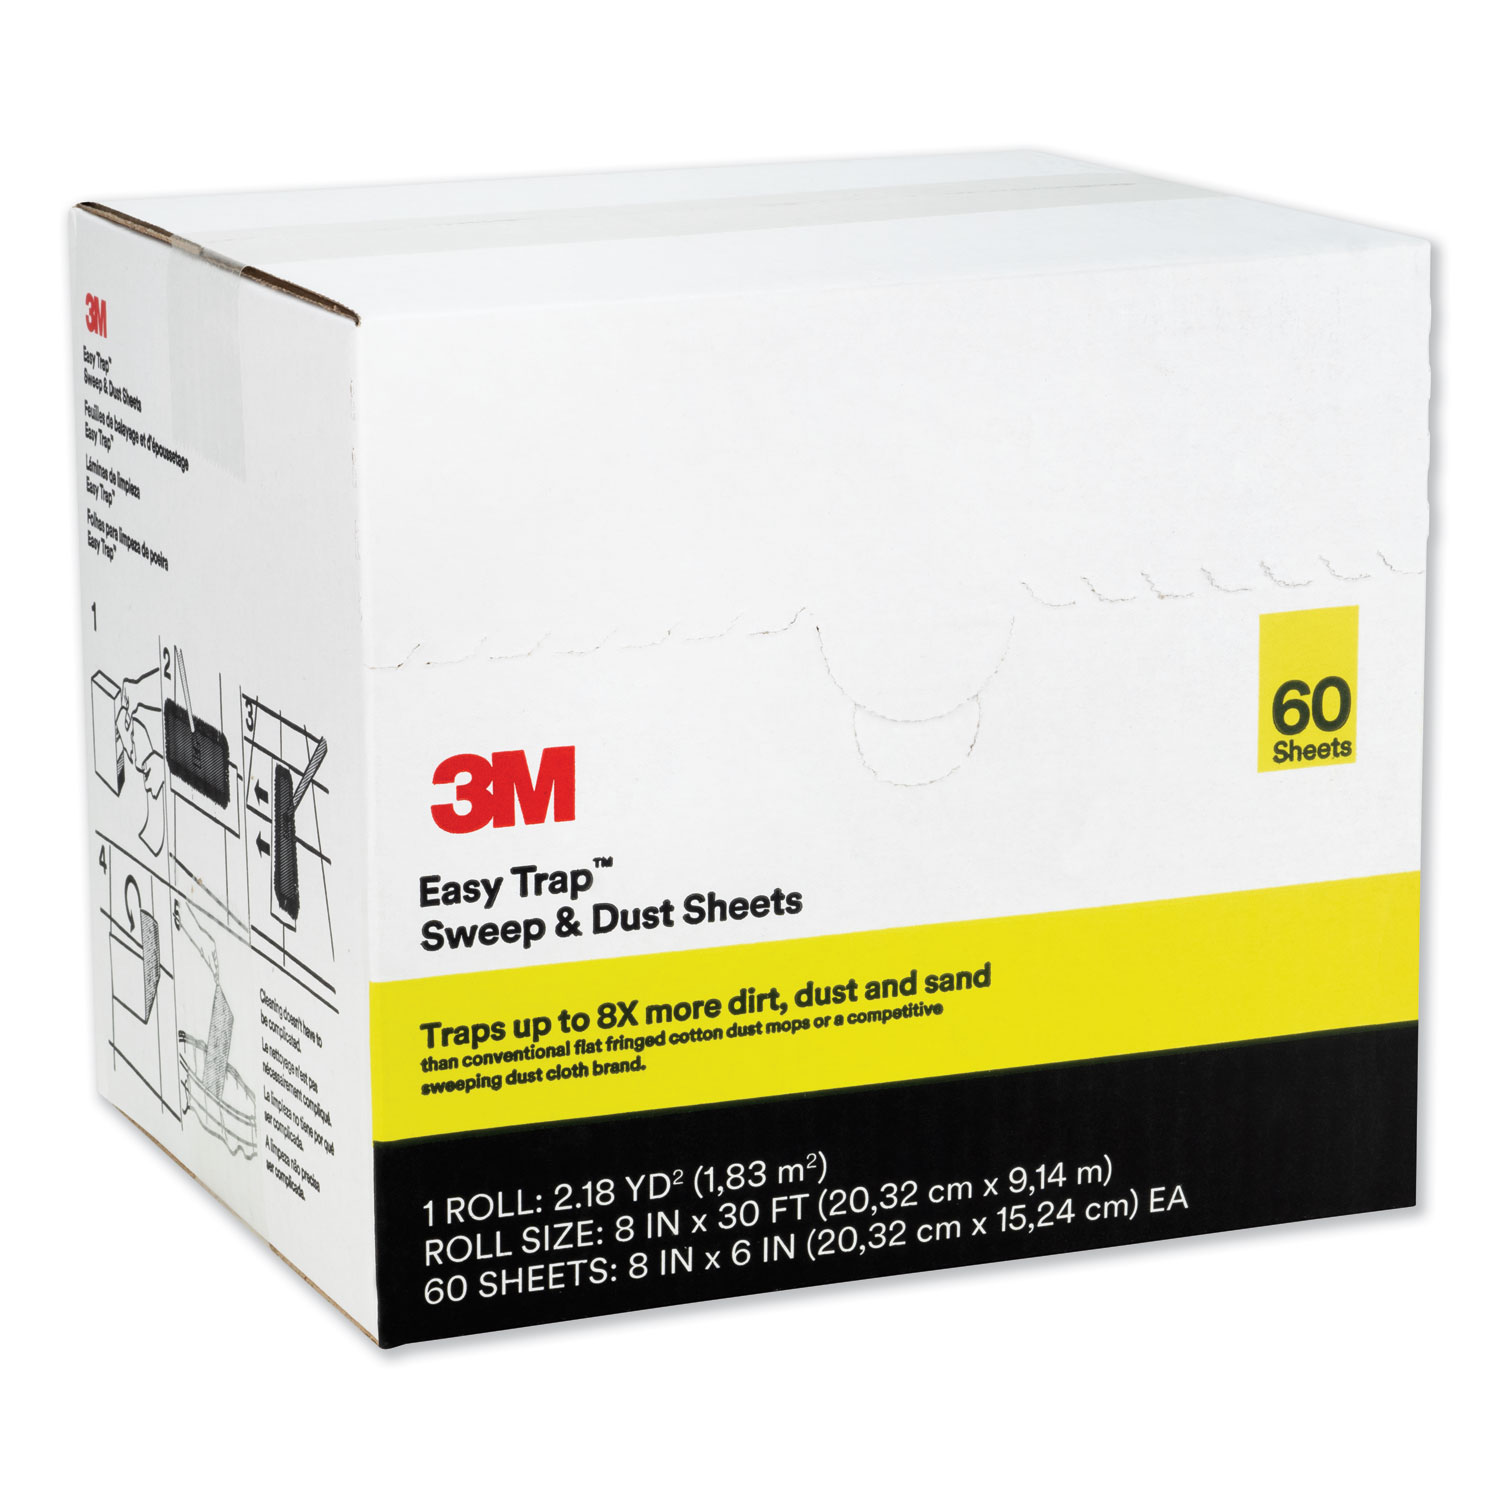 3M Easy Trap Duster Sweep And Dust Sheets 60 Sheets 5/" x 6/" x 30/'